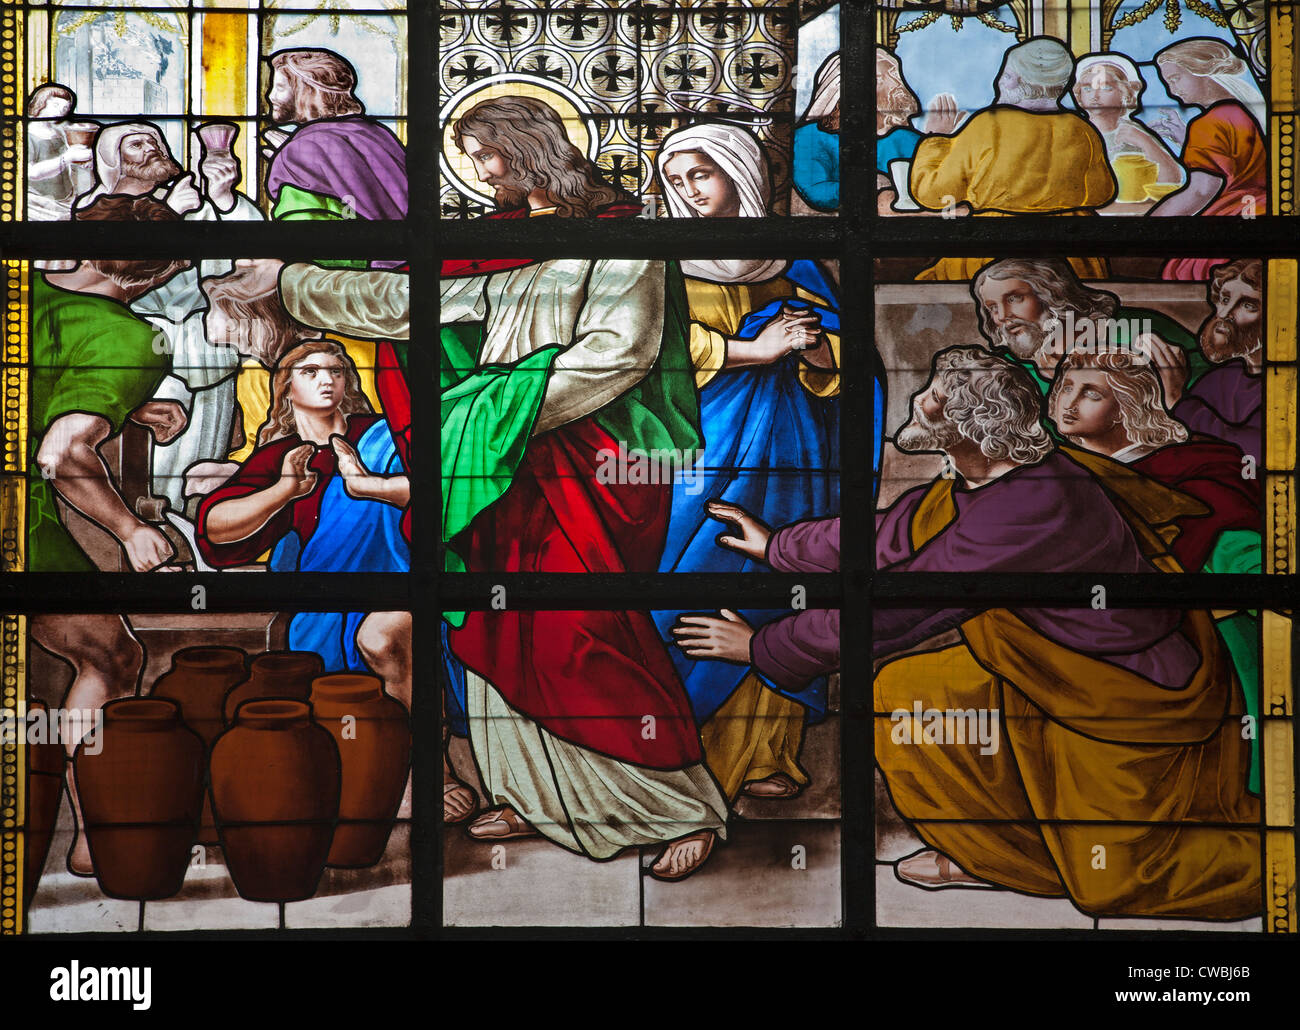 BRUSSELS - JUNE 214: Jesus by miracle in Cana. Detail of windowpane of church on June 21, in Brussels. Stock Photo